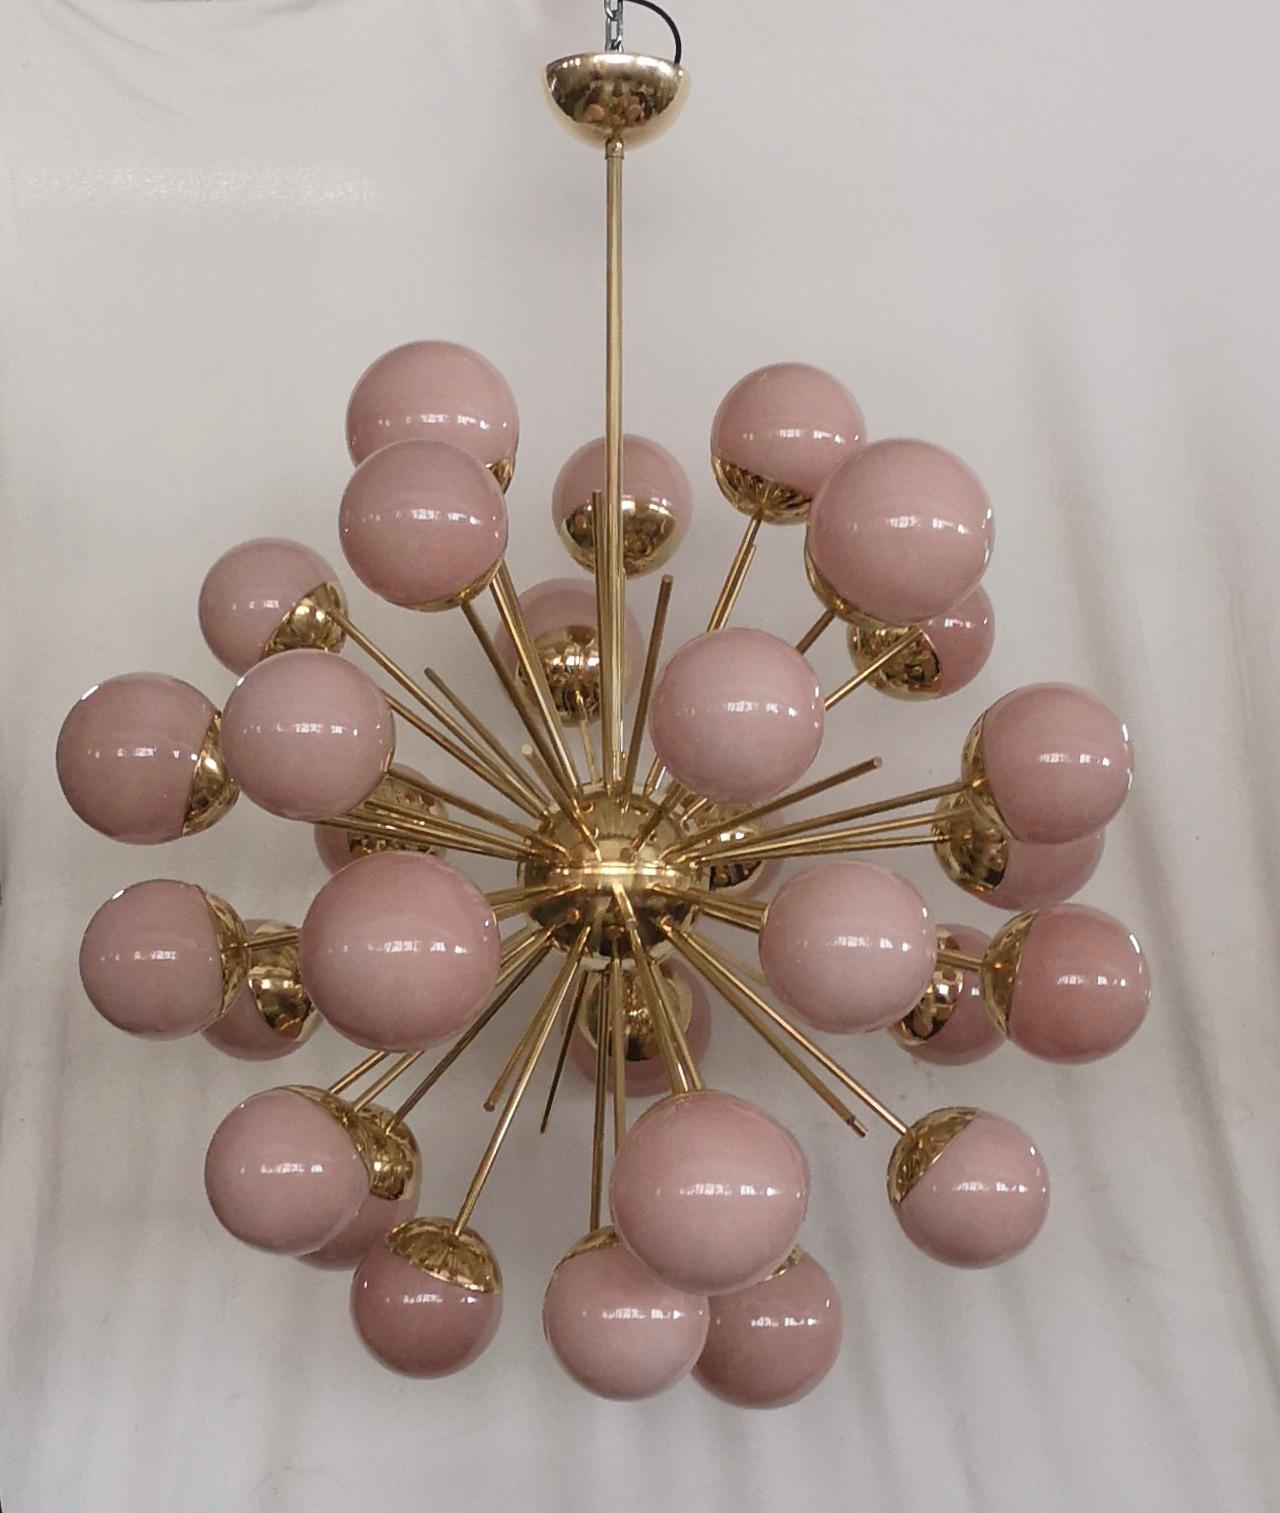 A fantastic spot of pink color, amazing design due to its very particular shape of these pink glass spheres and for the fantastic brass rods. Very elegant, will furnish and decorate your whole room.

Structure completely in brass like a sputnik with